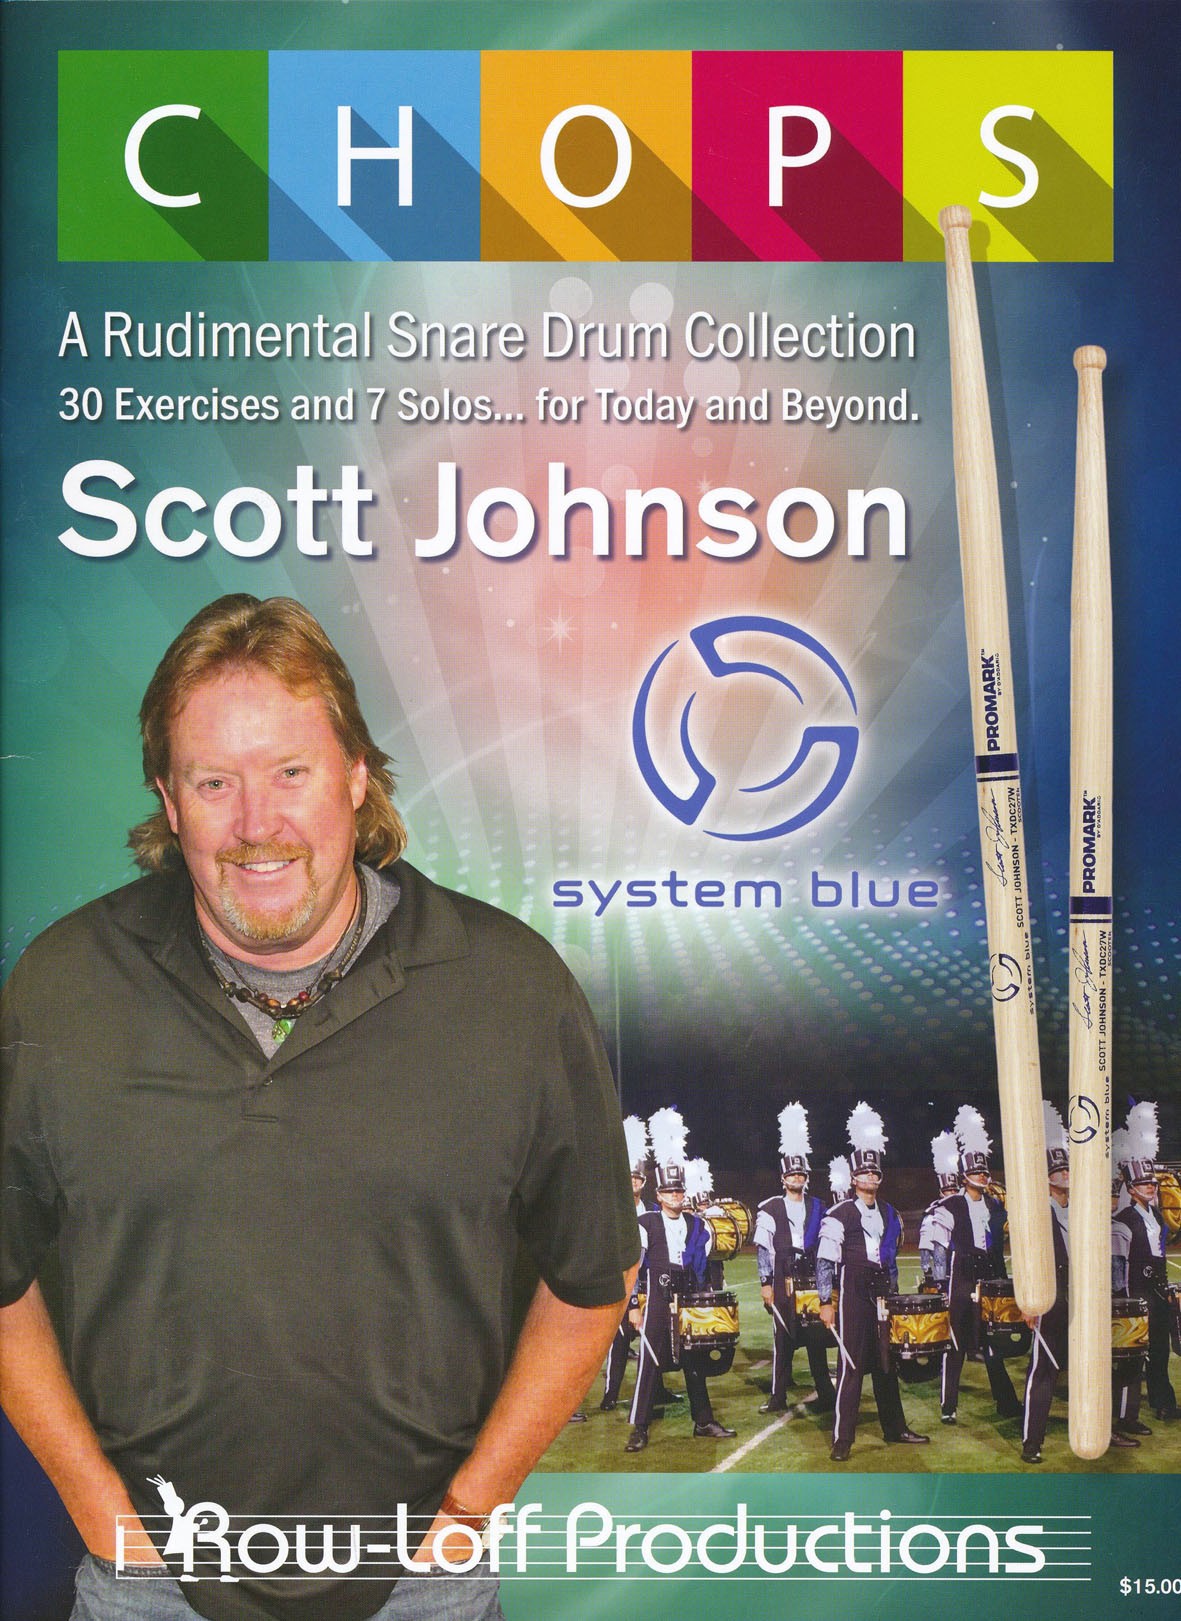 Chops - A Rudimental Snare Drum Collection by Scott Johson